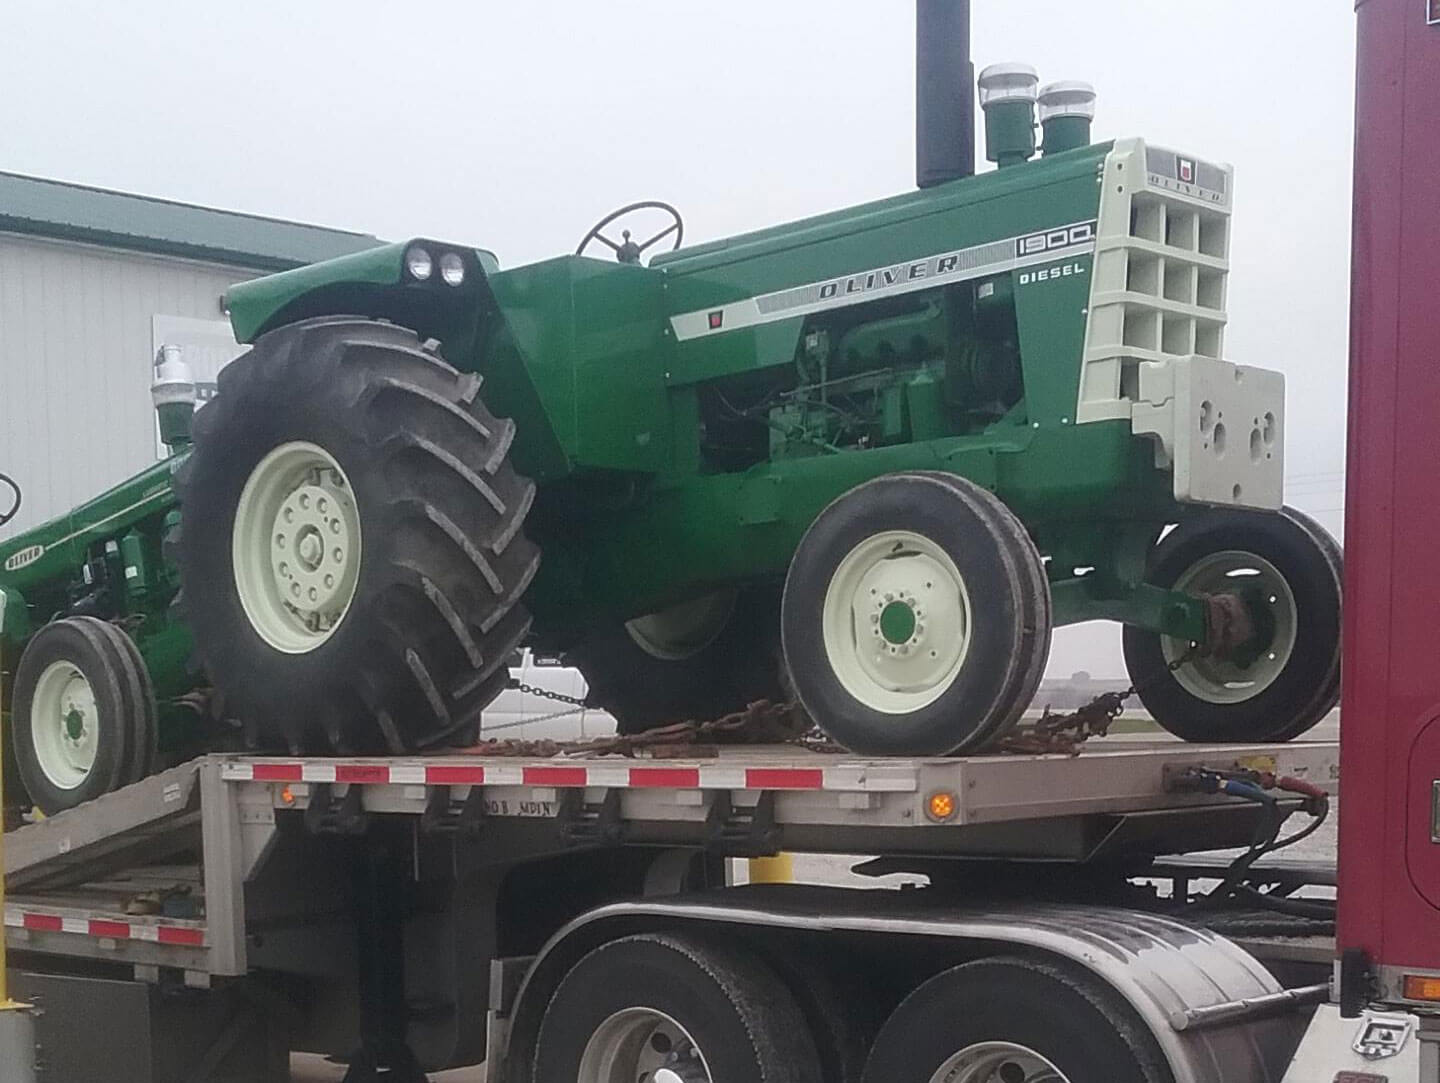 Shipping Two Oliver Tractors